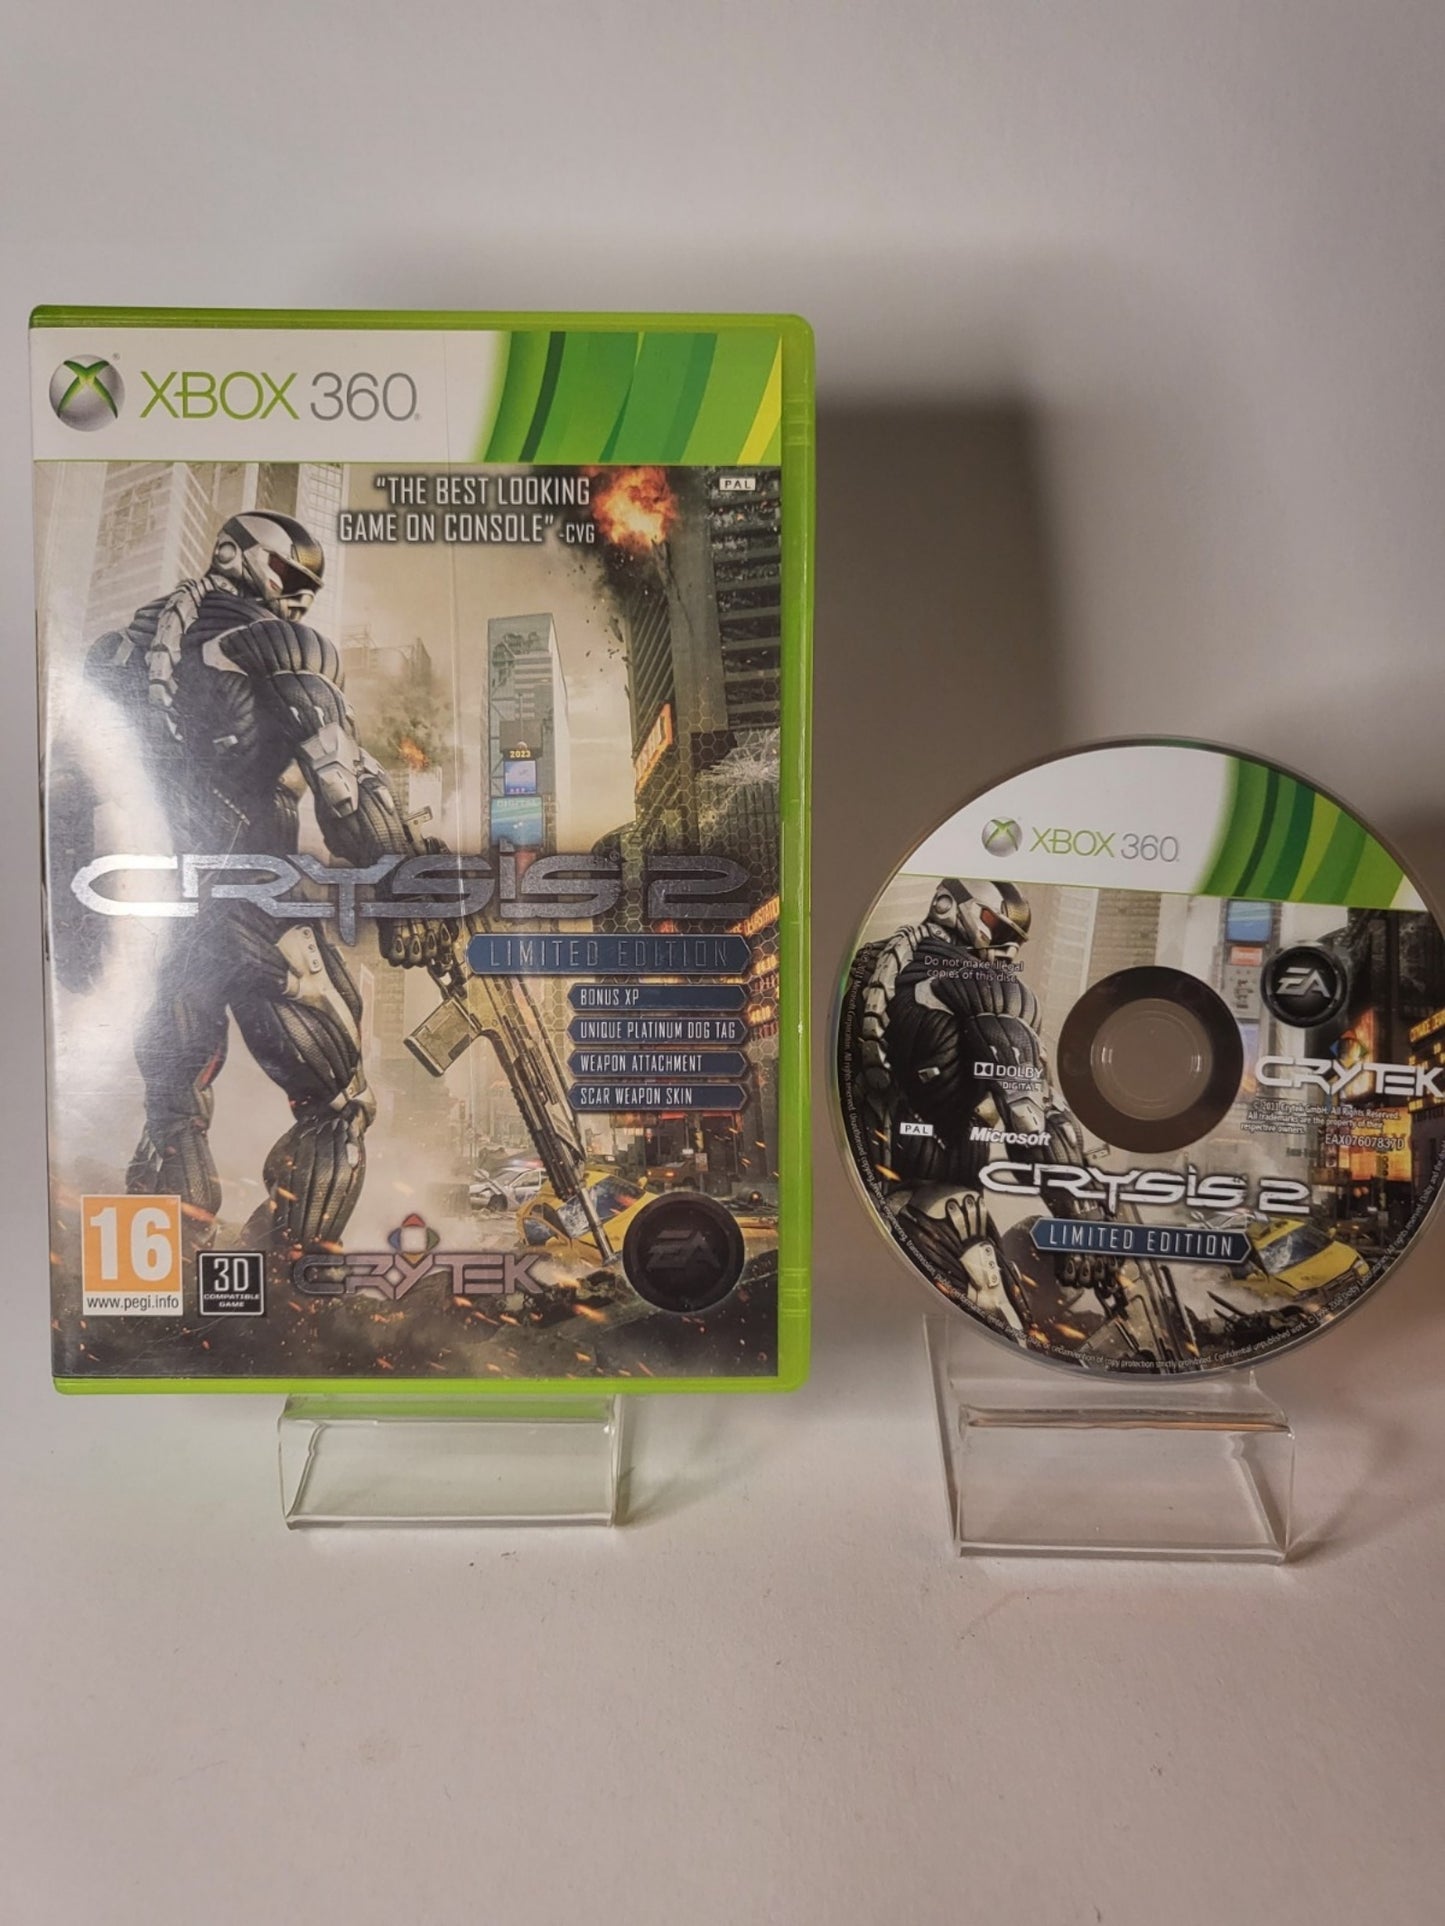 Crysis 2 Limited Edition Xbox 360